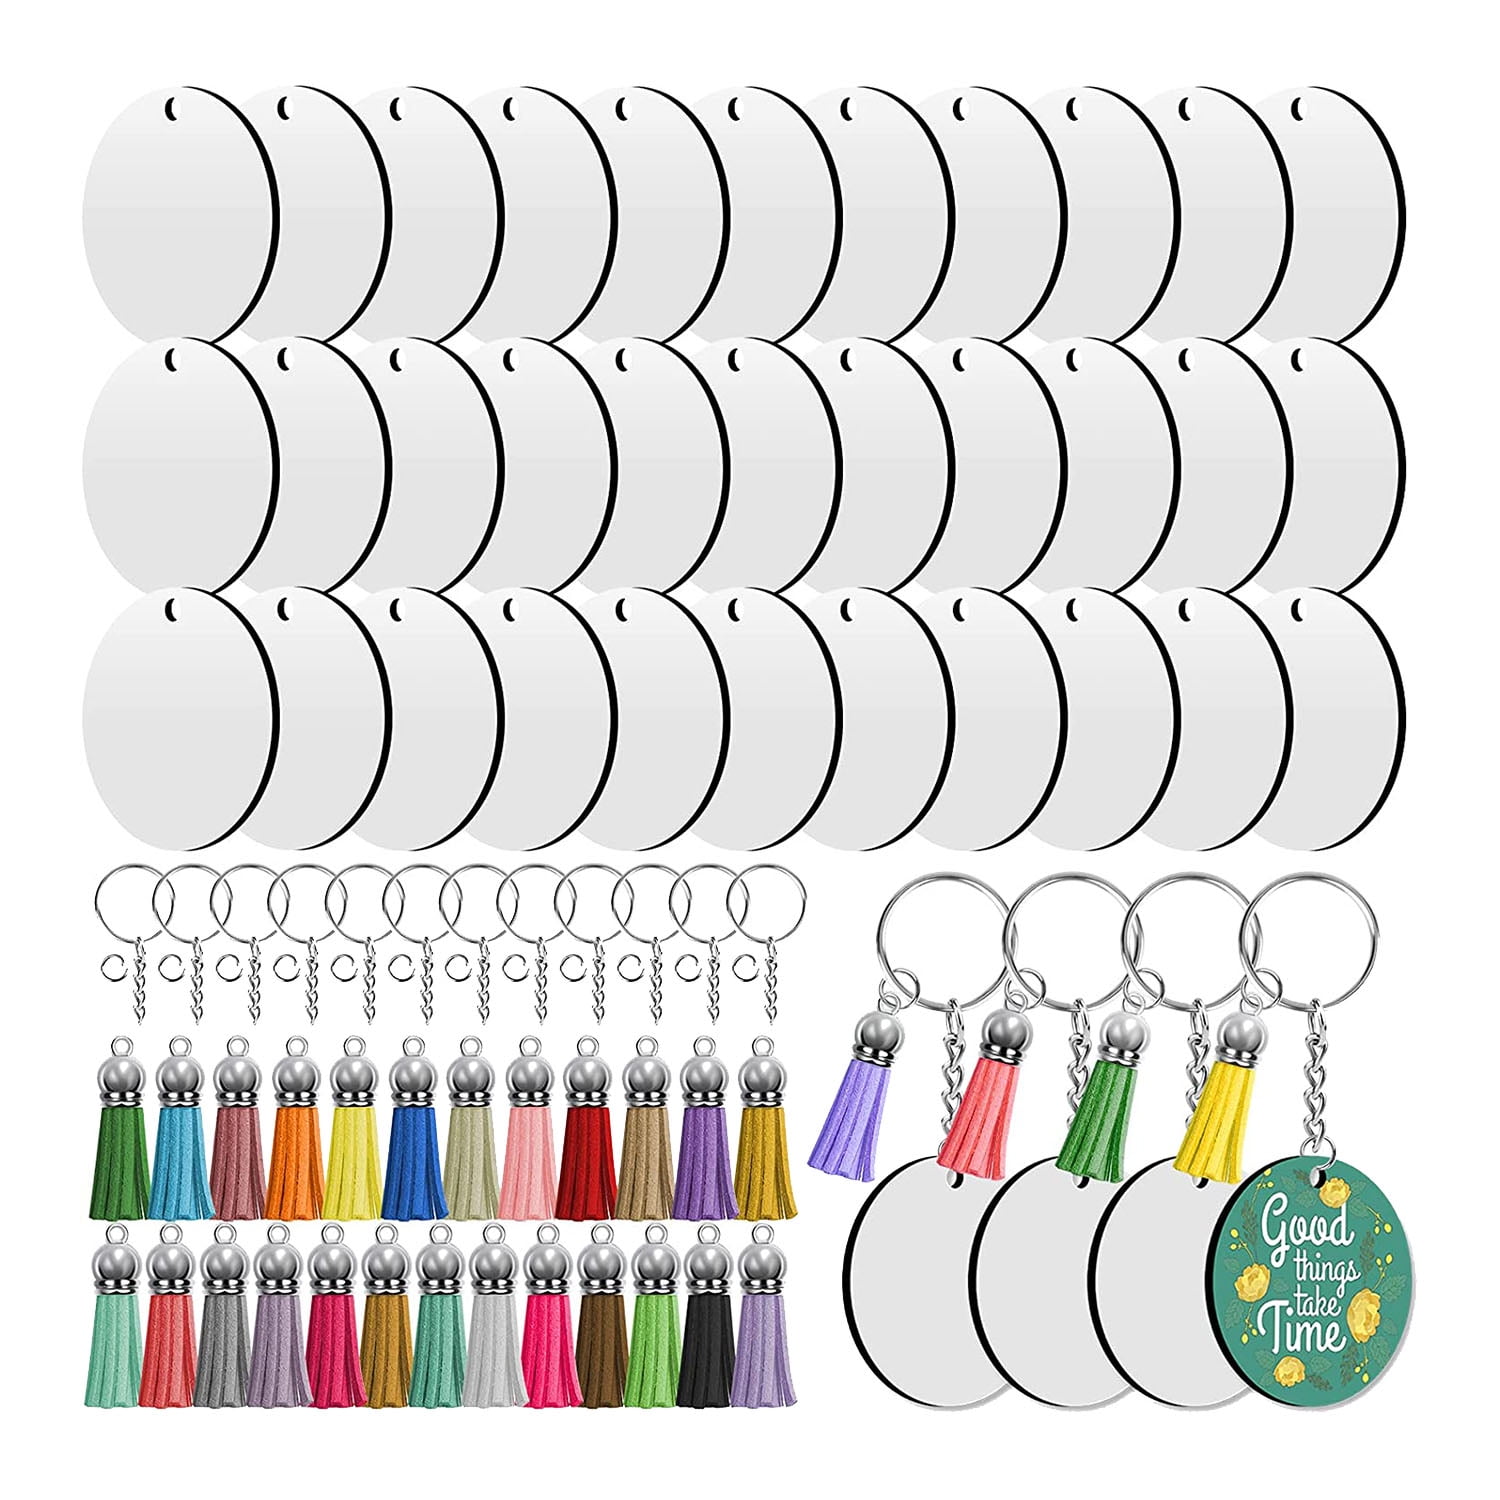 Sublimation Keychain Blanks Set with Tassels Keychain Rings and Jump Rings for DIY Keychain Crafting Keychain Blanks Bulk Kit120Pcs 2inch Round Sublimation Wooden Blanks Keychain Circle 